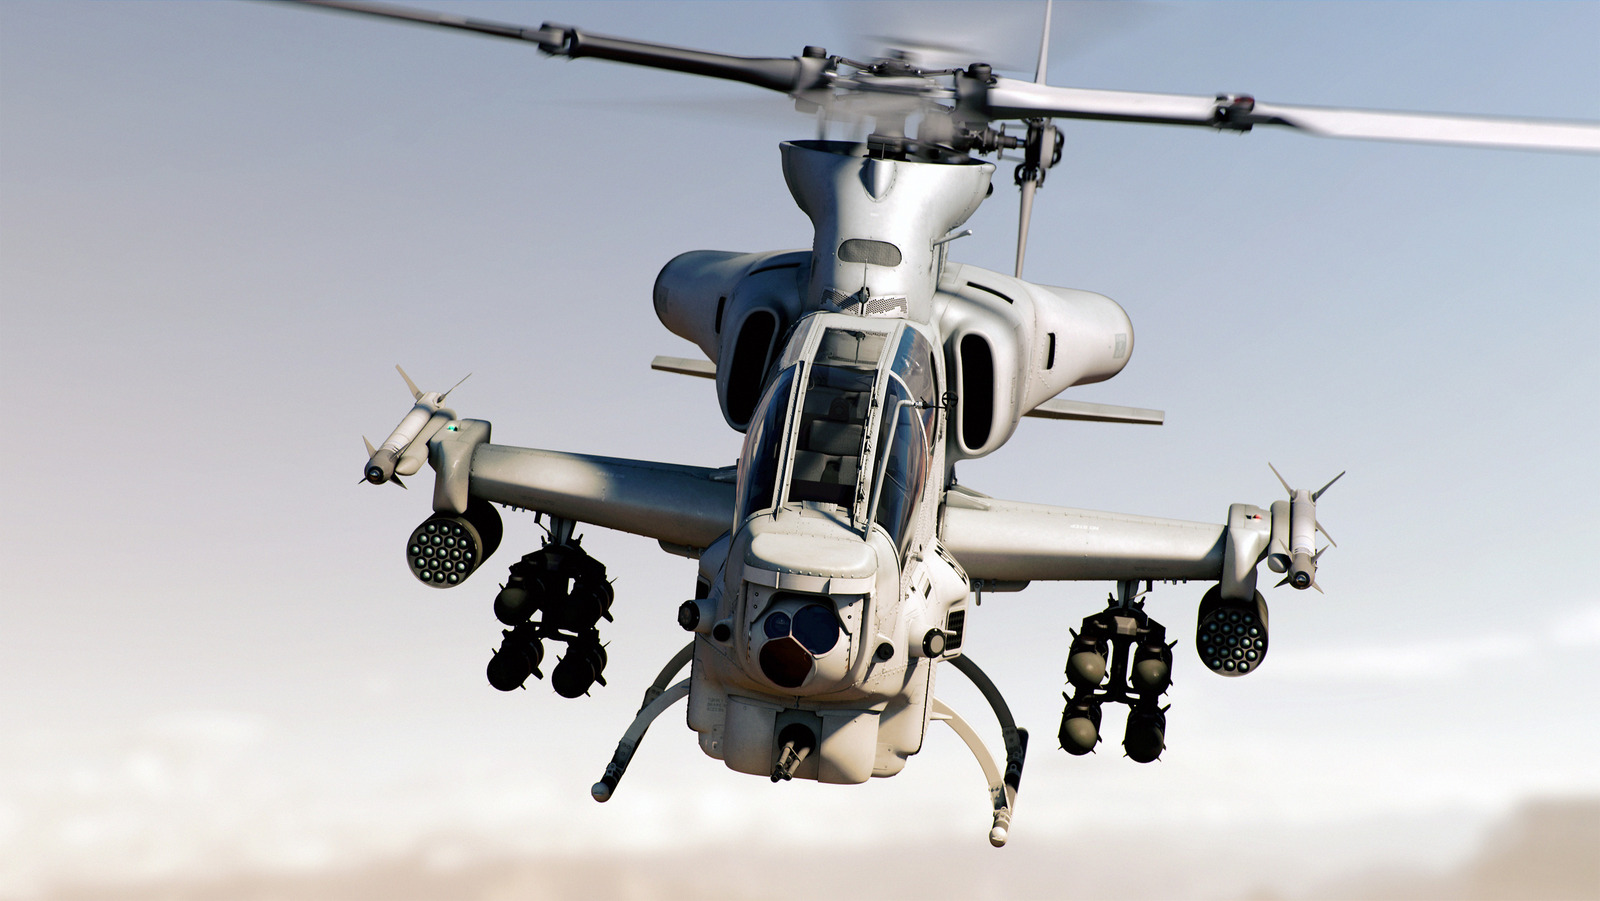 1600x901_15605_Bell_AH_1Z_Attack_Helicopter_3d_realism_helicopter_picture_image_digital_art.jpg